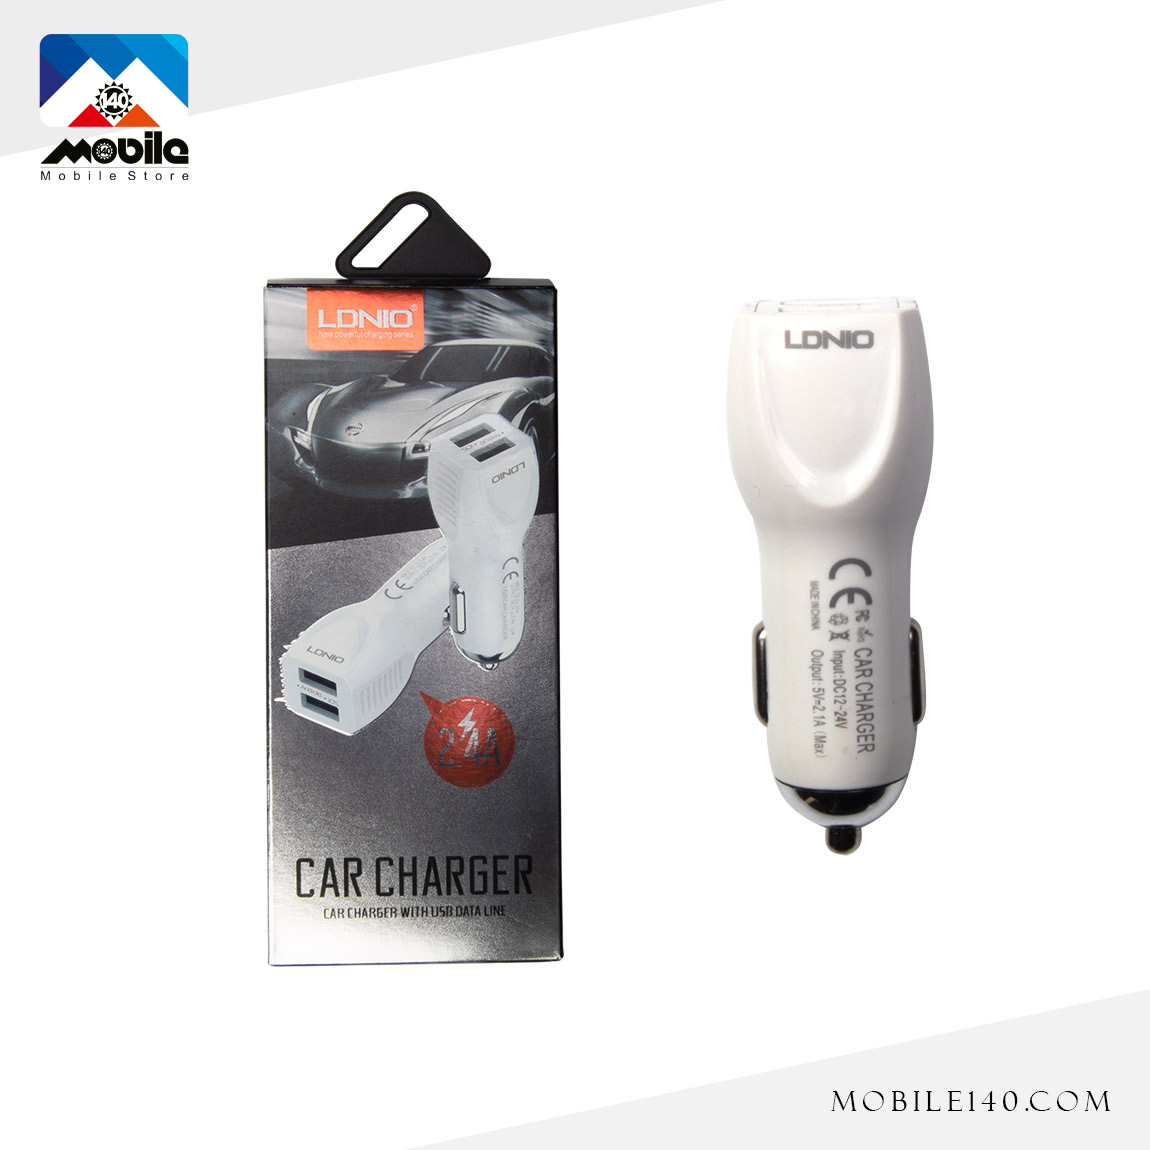 Ldino DL-112 Car Charger 1